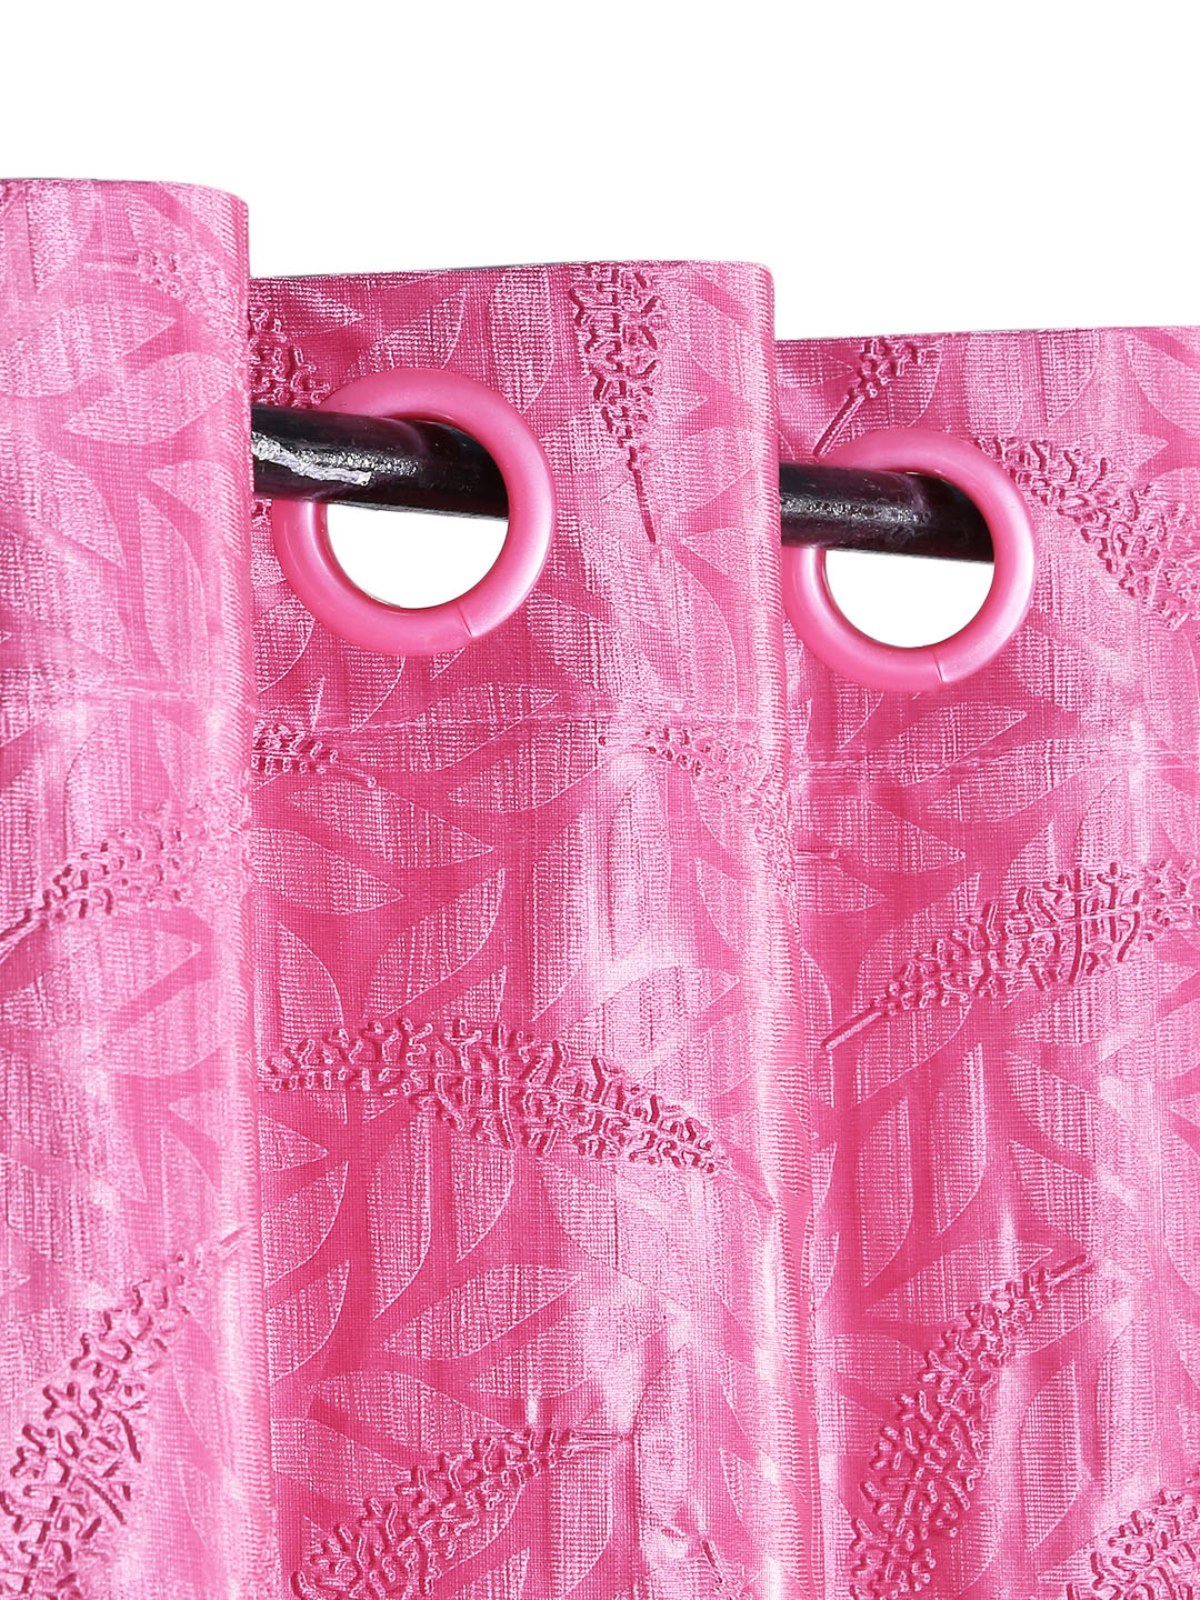 Romee Pink Leafy Patterned Set of 1 Window Curtains